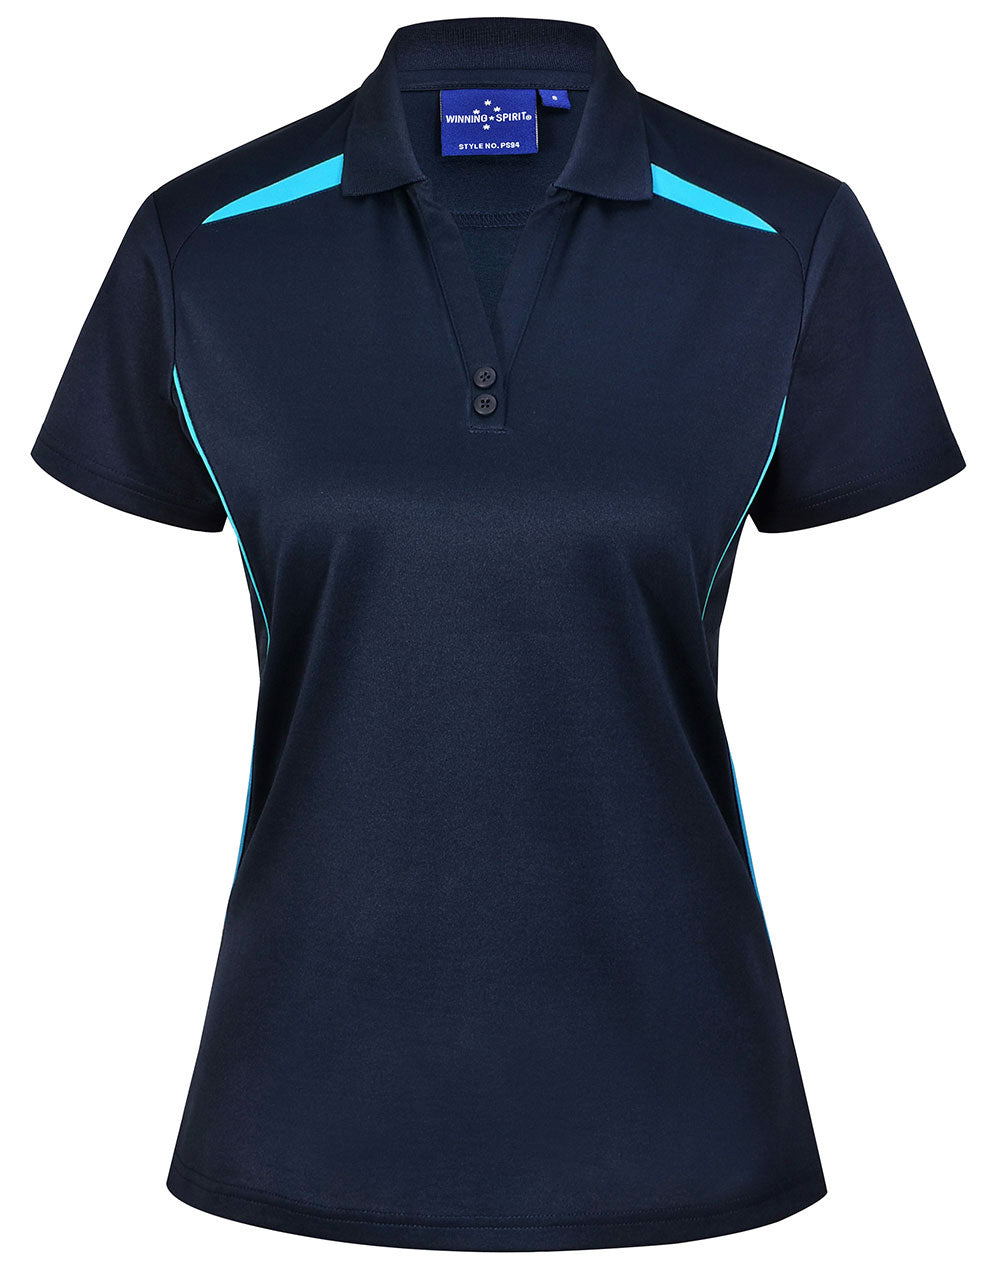 Women's Sustainable Poly/Cotton Contrast Polo Shirt PS94 Casual Wear Winning Spirit Navy/Aqua 6 